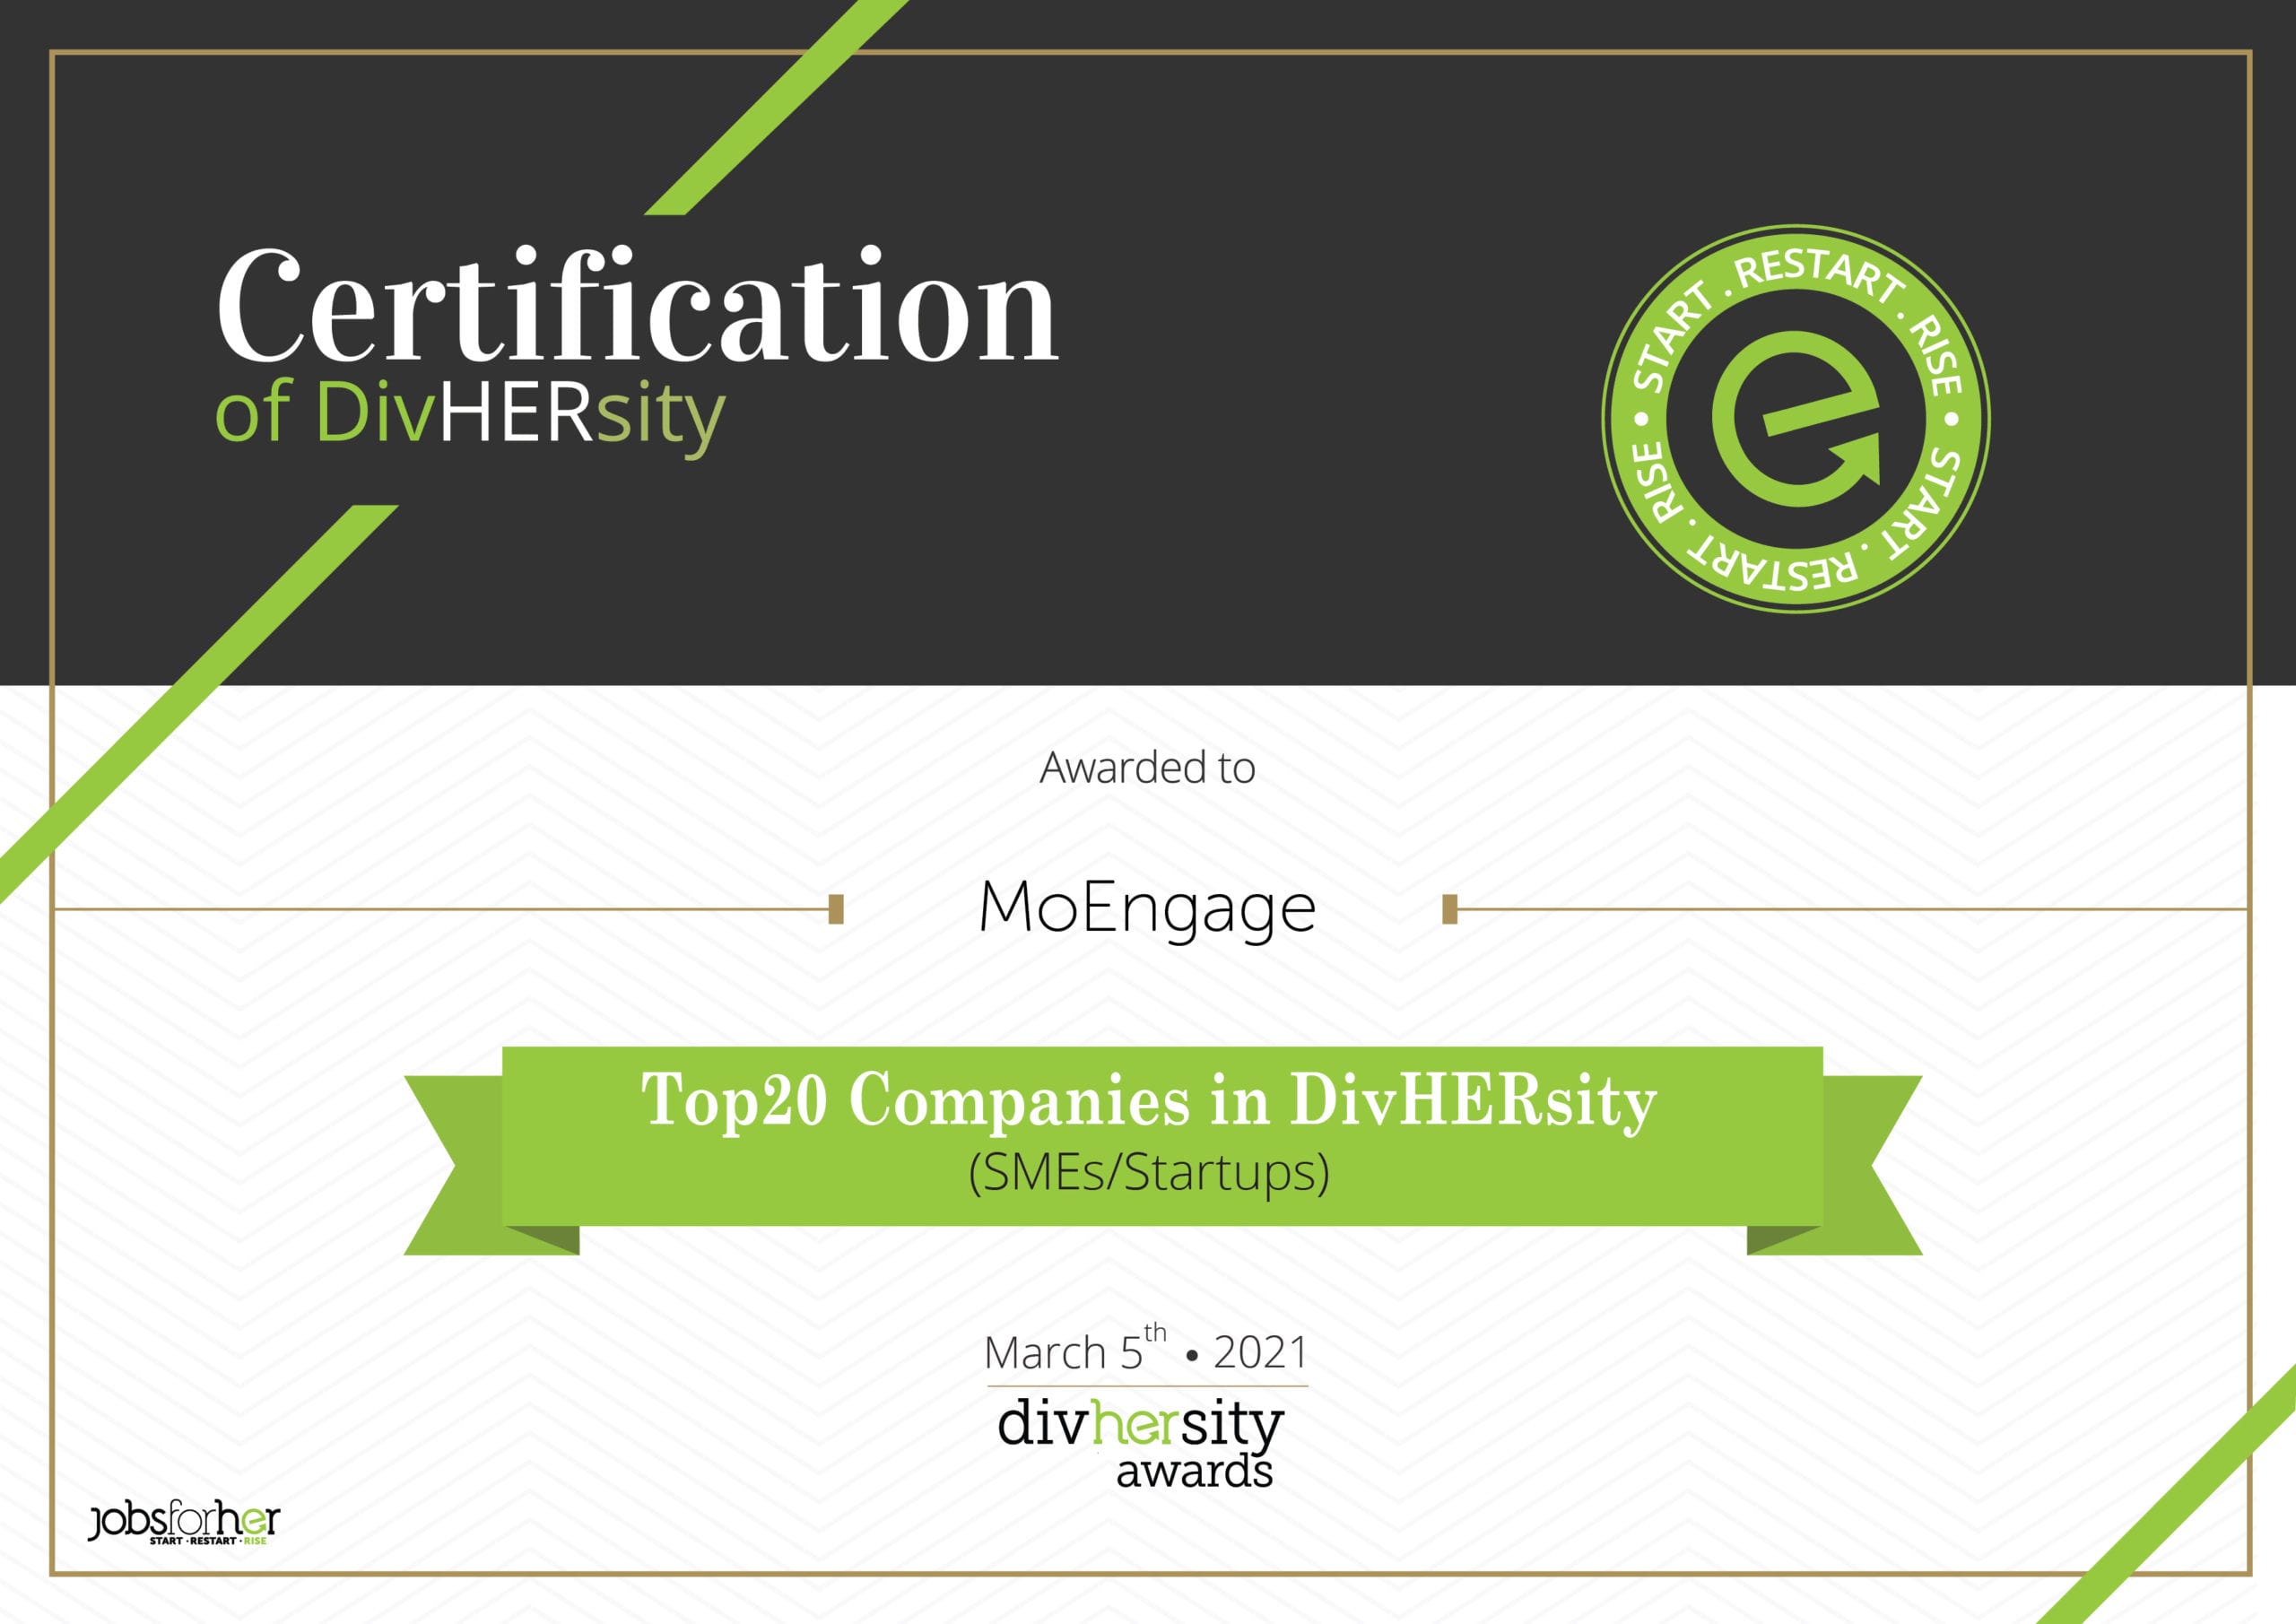 Certification of DivHERsity awarded to MoEngage